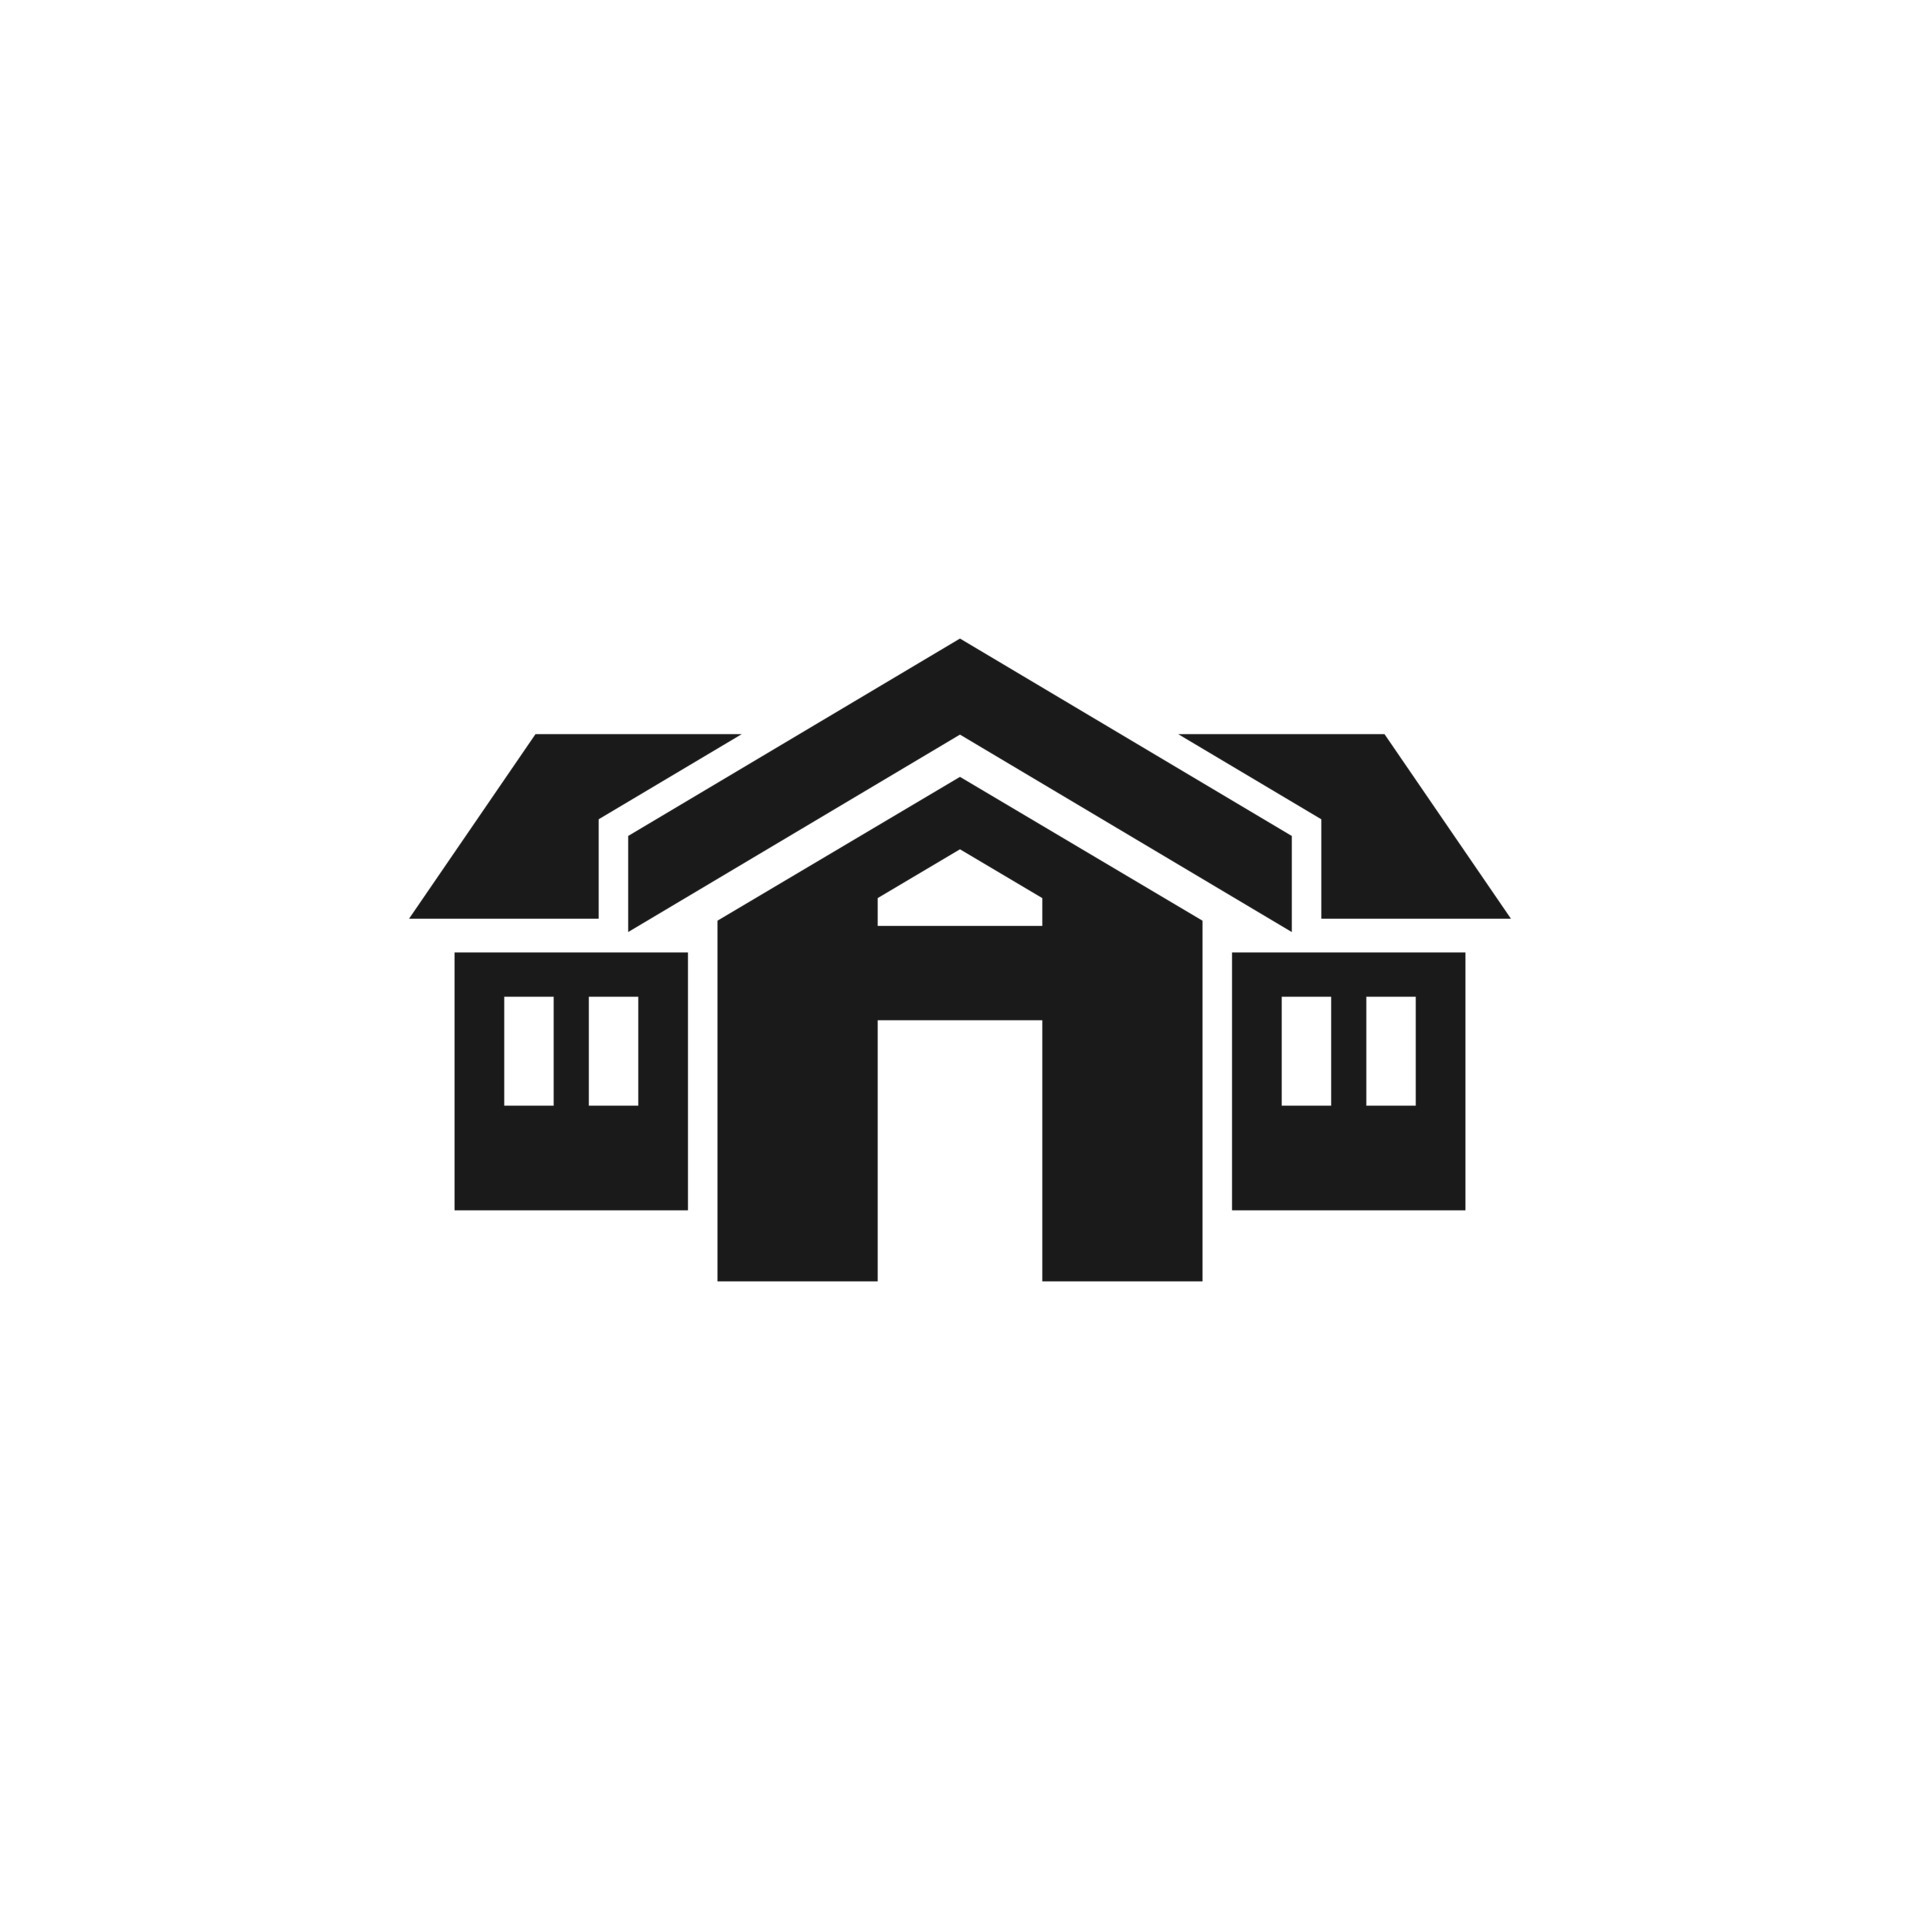 house-building-icon-home-symbol-for-location-plan-free-vector